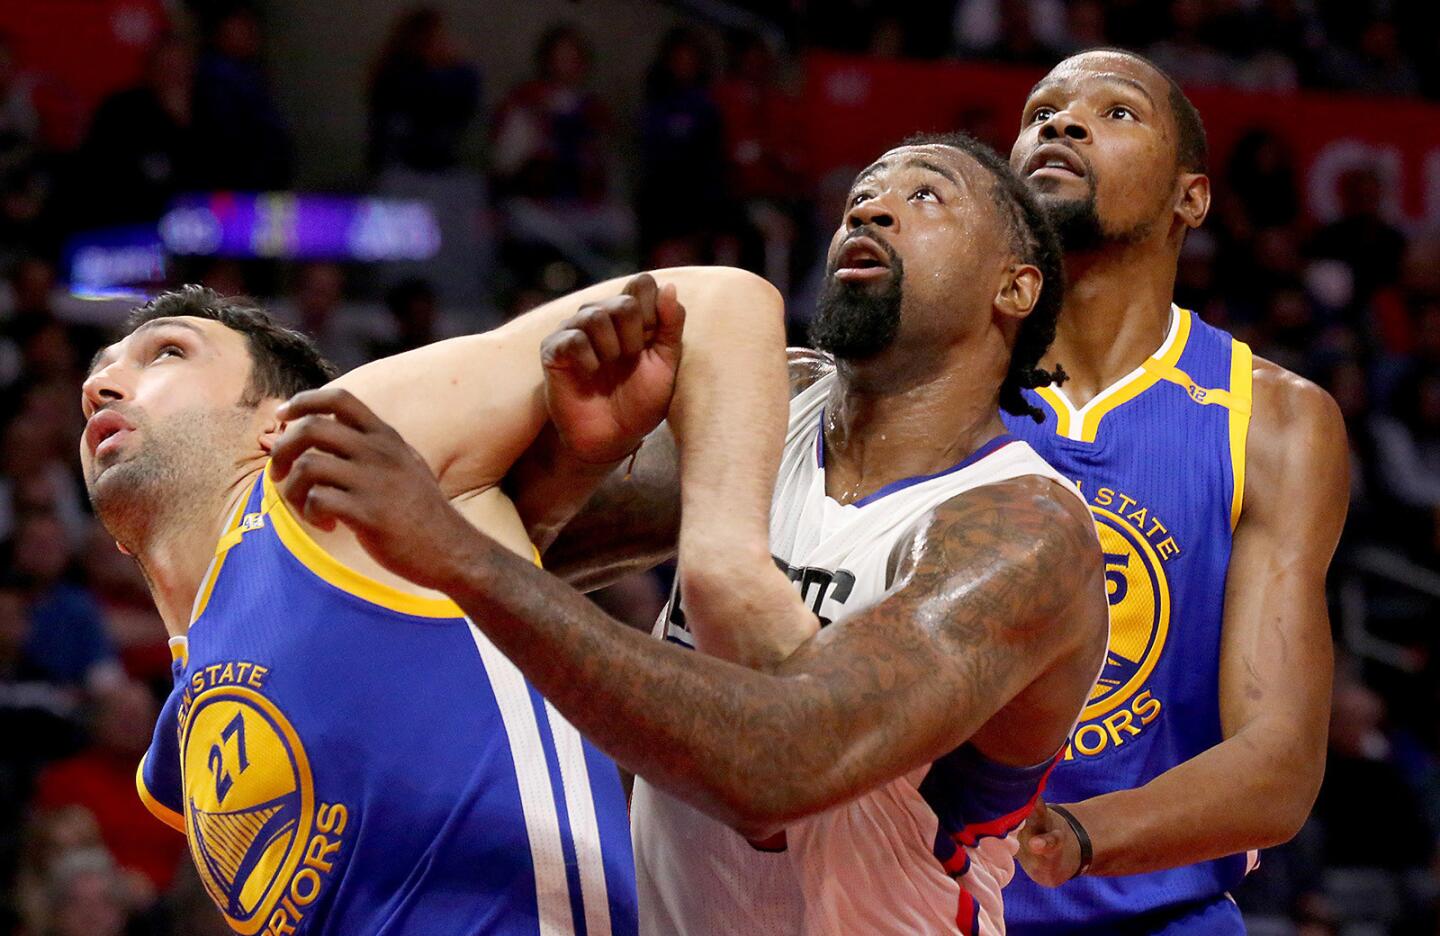 Clippers center DeAndre Jordan fights for rebounding position against Warriors center Zaza Pachulia, left, and forward Kevin Durant during the second quarter Wednesday.